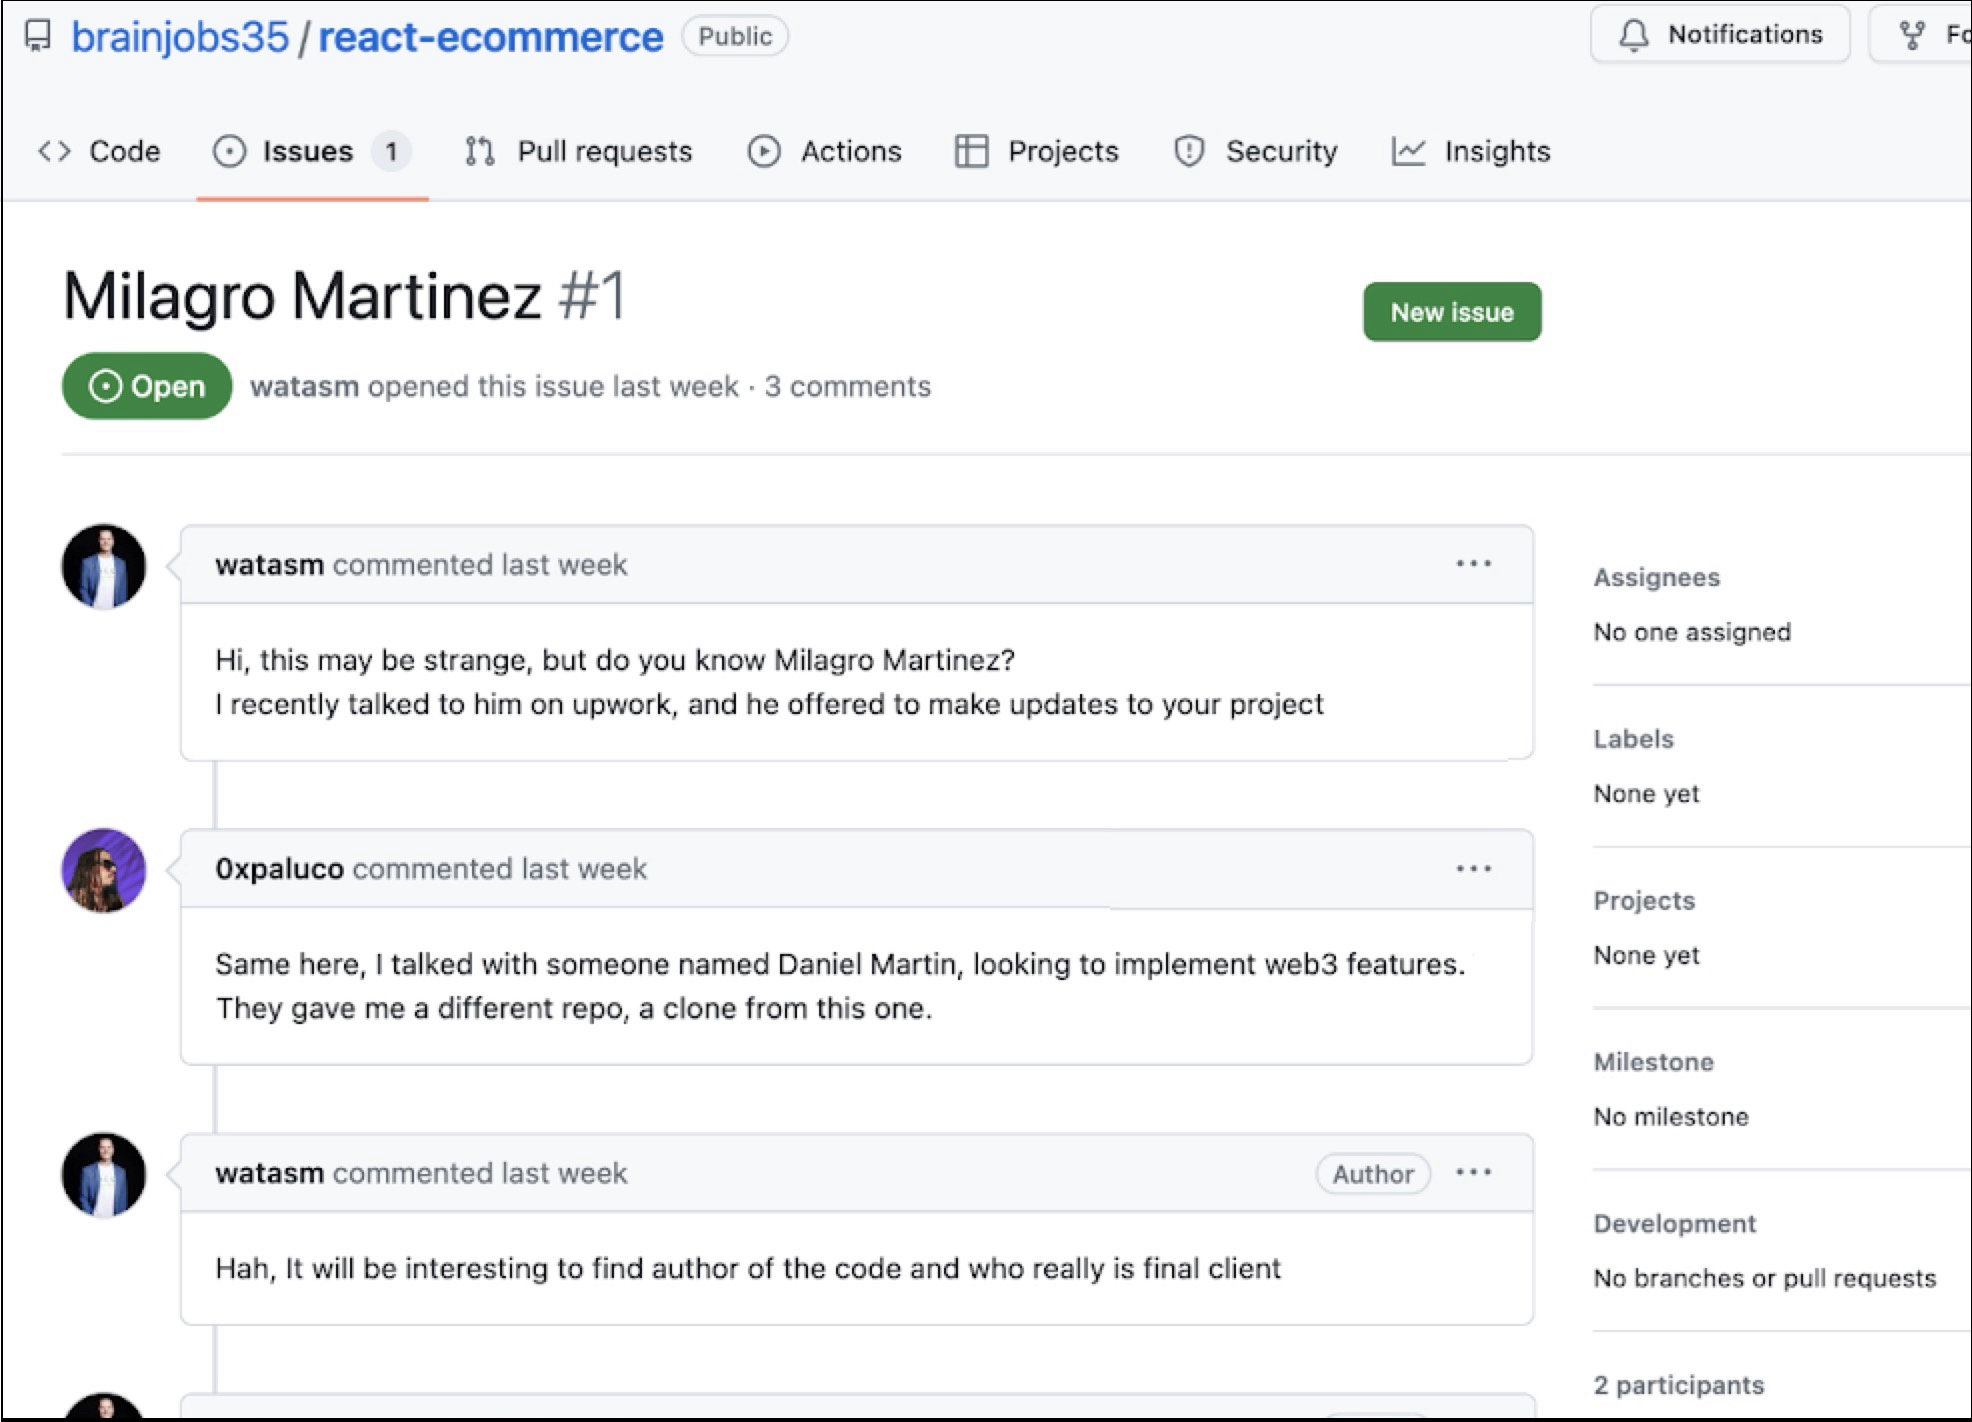 Image 2 is a screenshot of GitHub user comment page for brainjobs35 react-ecommerce. Milagro Martinez #1. There is a conversation between user watasm and user 0xpaluco where they discuss Milagro and how to find the code author.